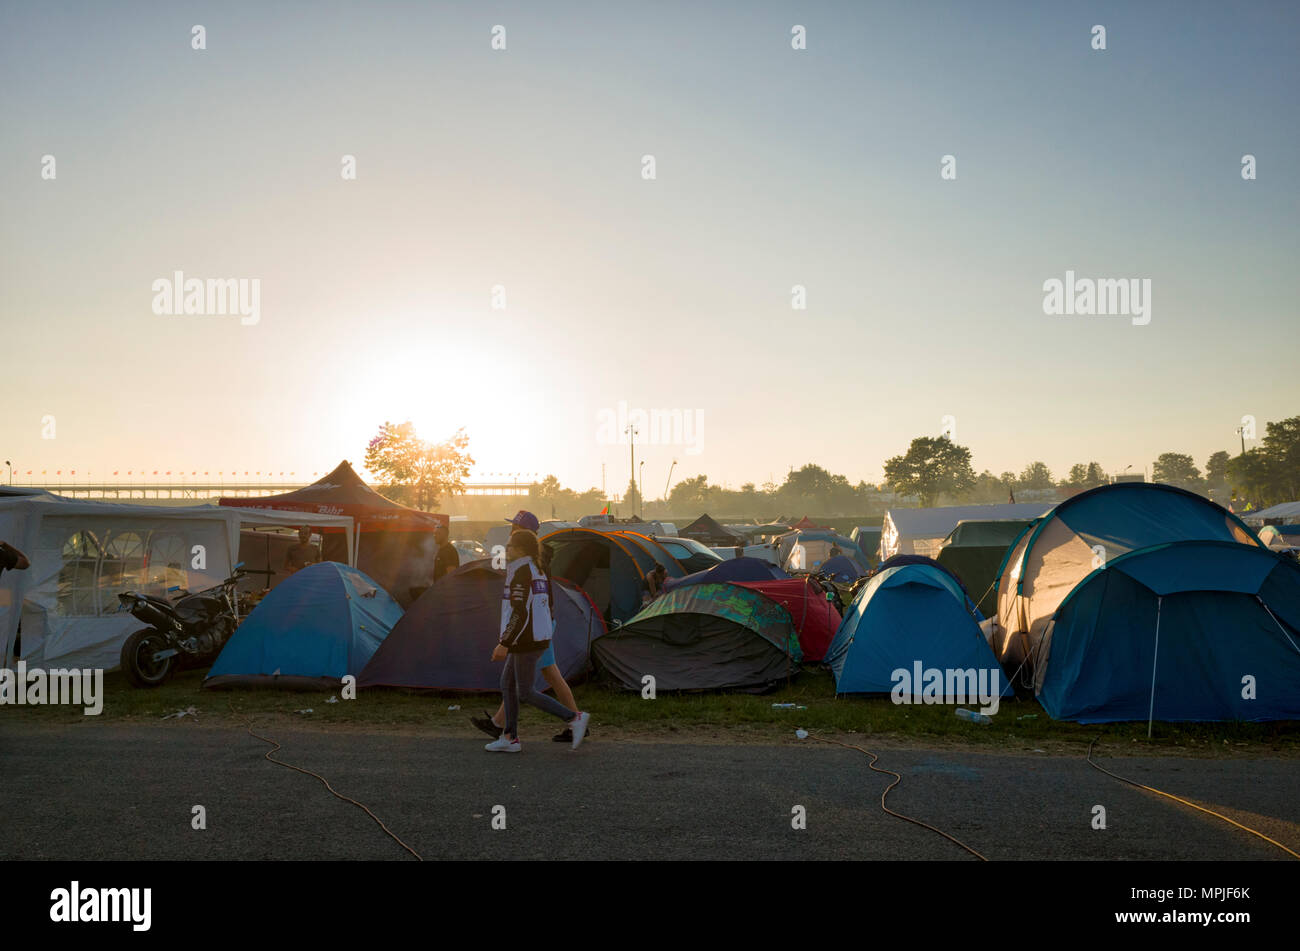 19-20th May 2018. Le Mans, France. Behind the scenes at the MotoGP. The sun  sets over the race circuit and campsite in the late evening. A couple walk  past the campsite tents